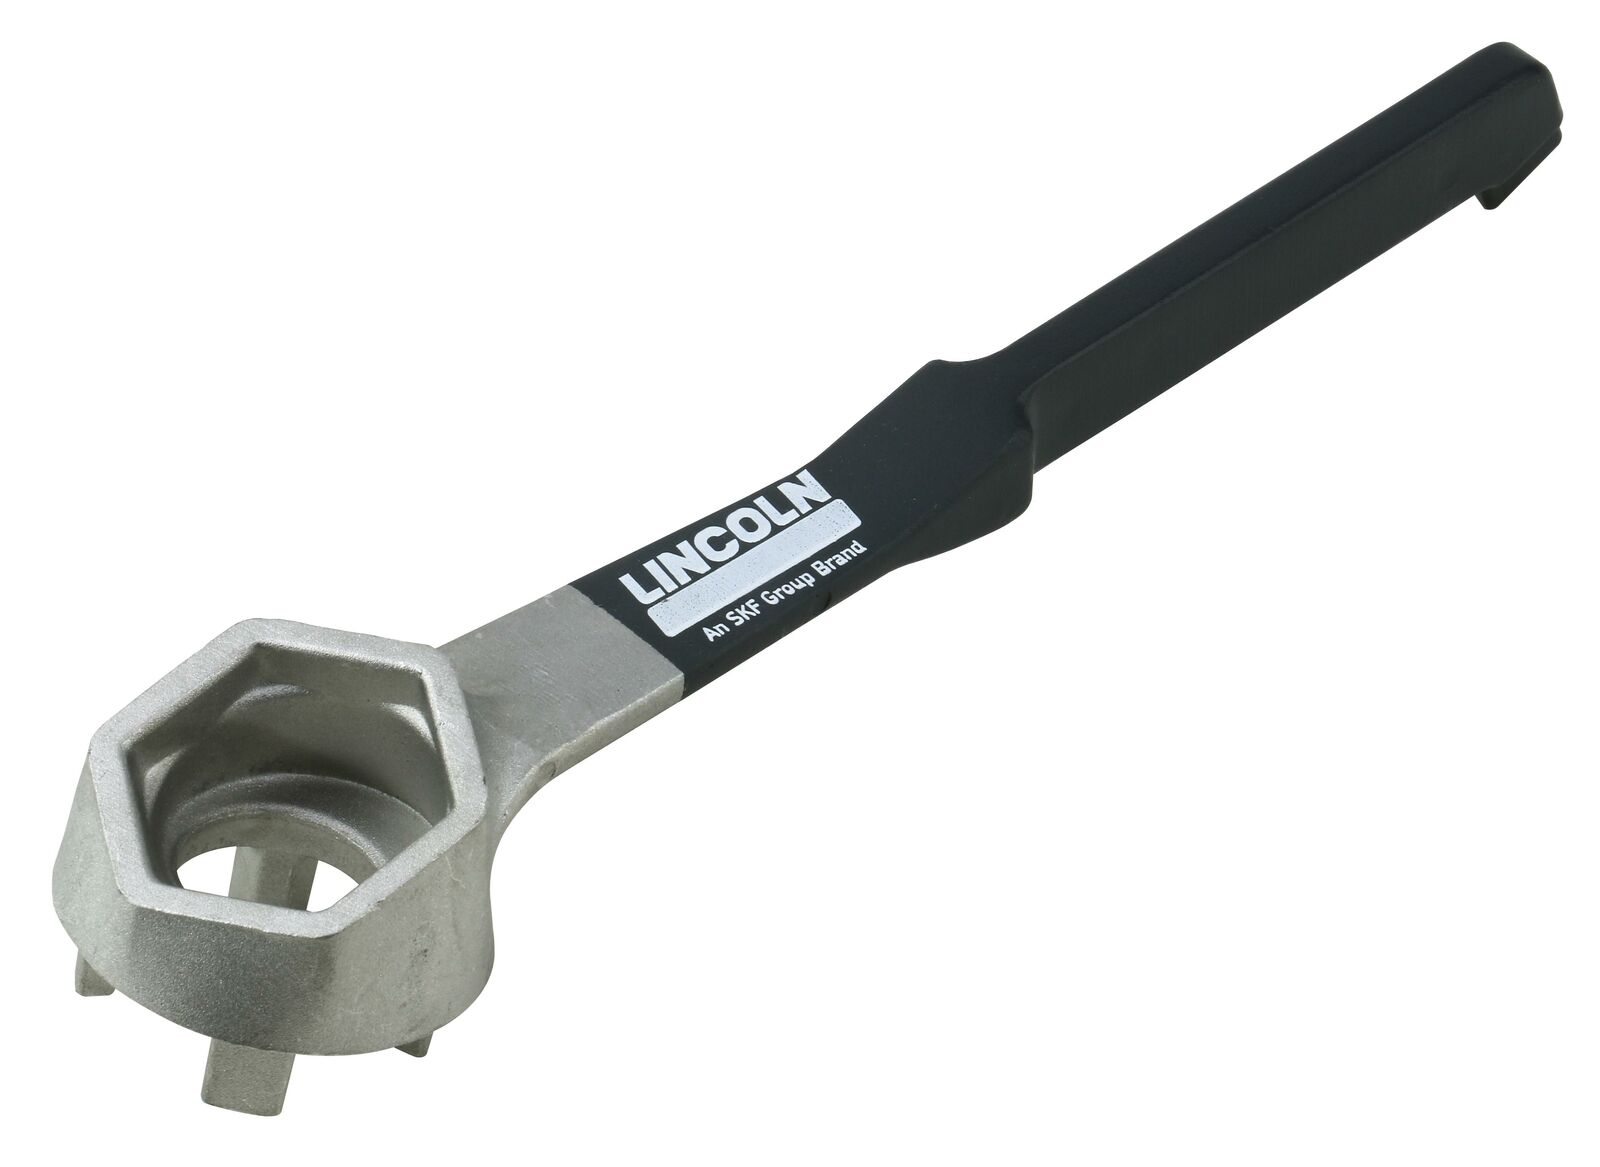 Lincoln 5841 Aluminum Drum Plug Bung Wrench for 15, 20, 30 and 55 Gallon Barrels with 2 Inch Bungs - image 2 of 6